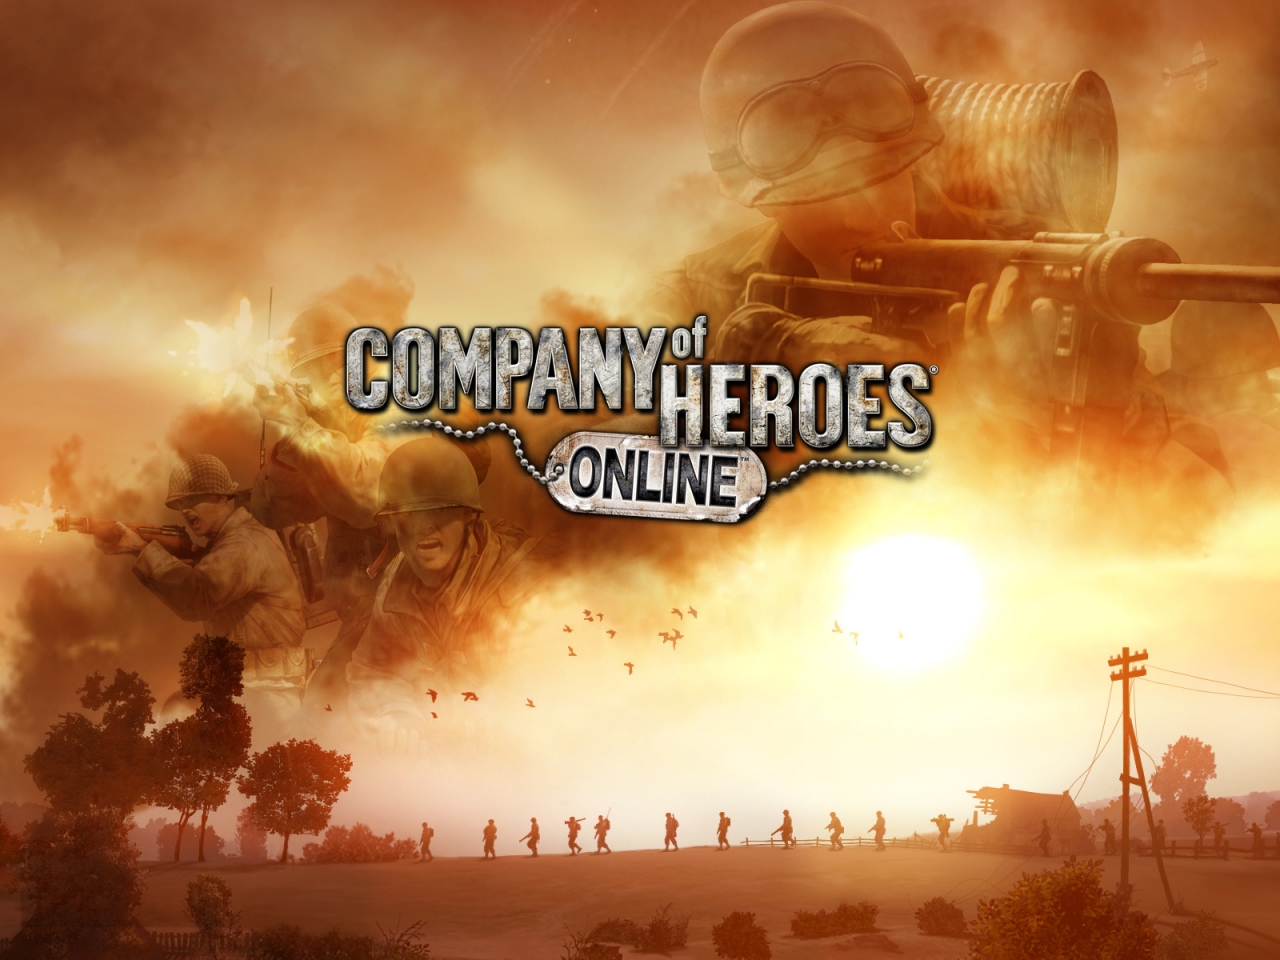 Company of Heroes Online for 1280 x 960 resolution